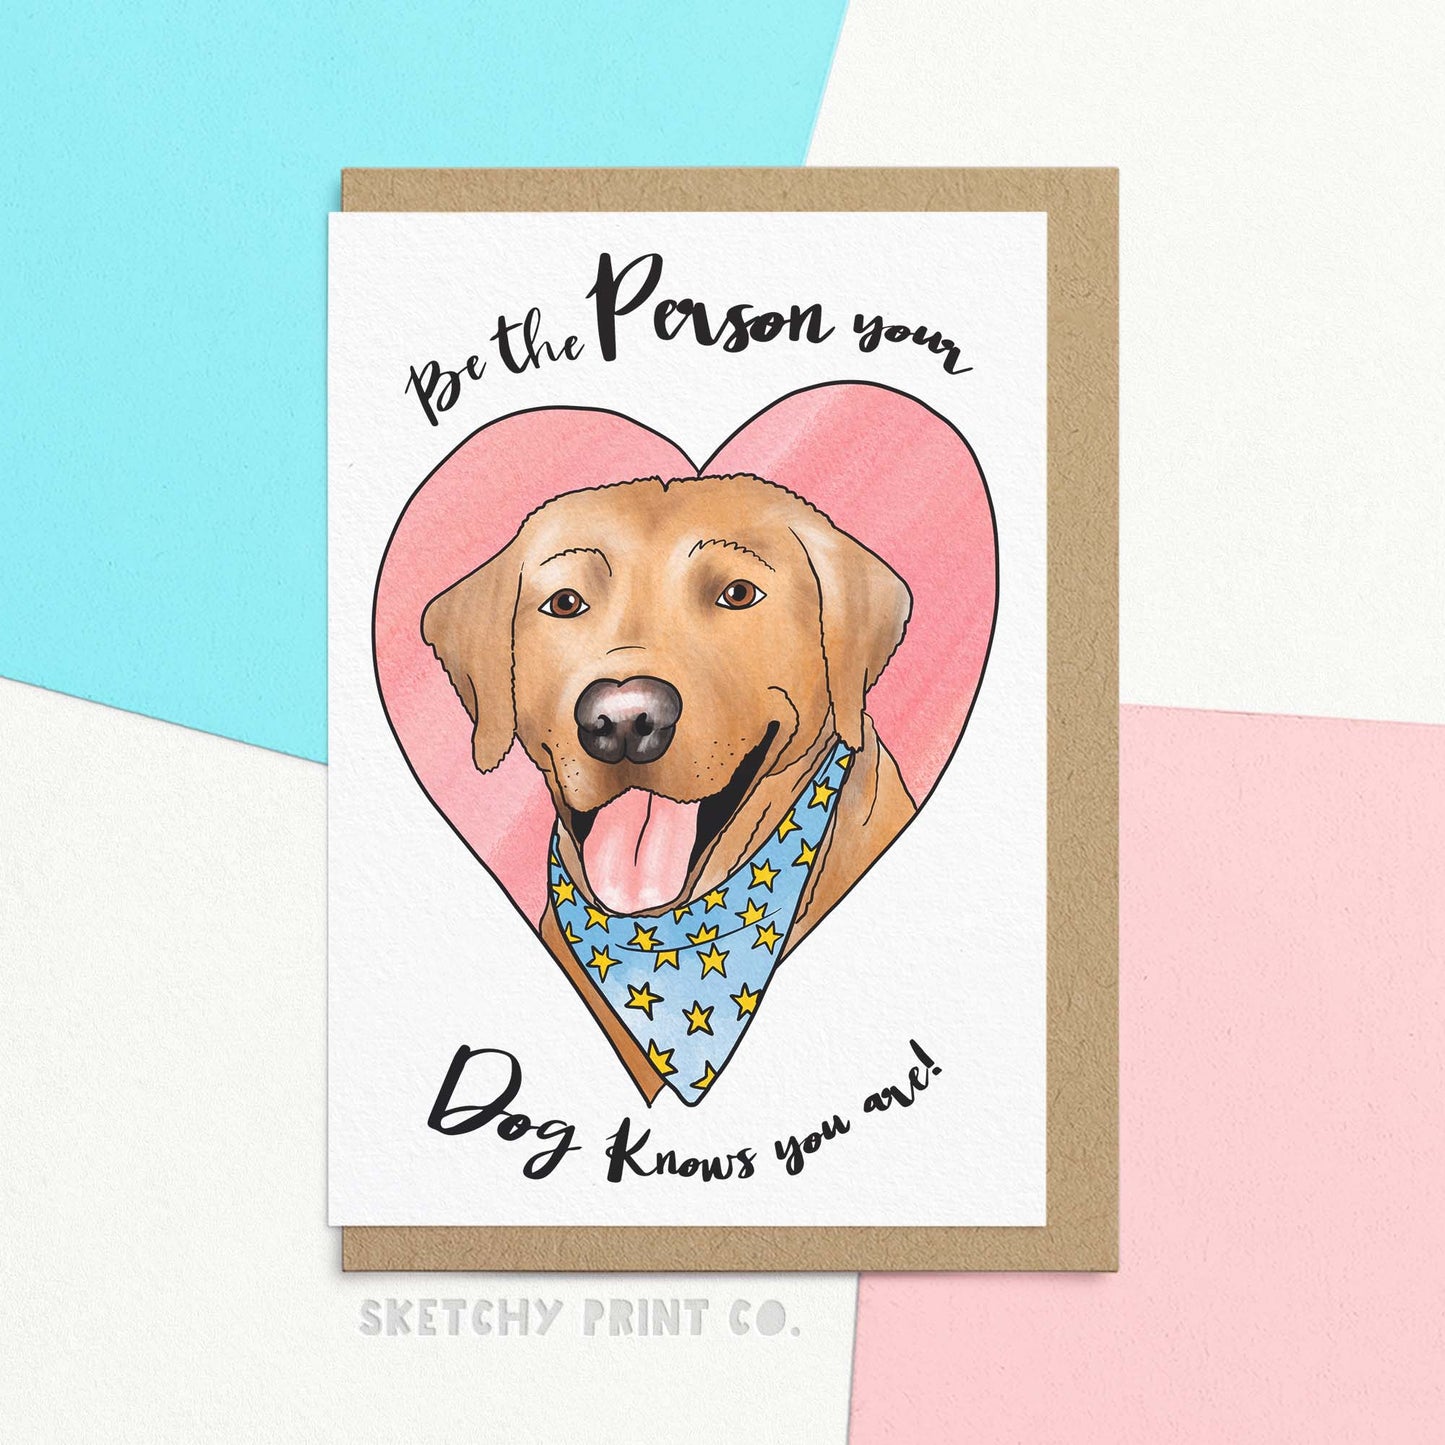 Cute just to say card reading be the person your dog knows you are! with a cute illustration of a red fox Labrador in a heart. Show your love for dogs with this cute 'just to say' card. Perfect for any dog person, or to simply remind someone that their furry friend is truly man's best friend. A fun and quirky way to express your love for these lovable creatures and their love for you!